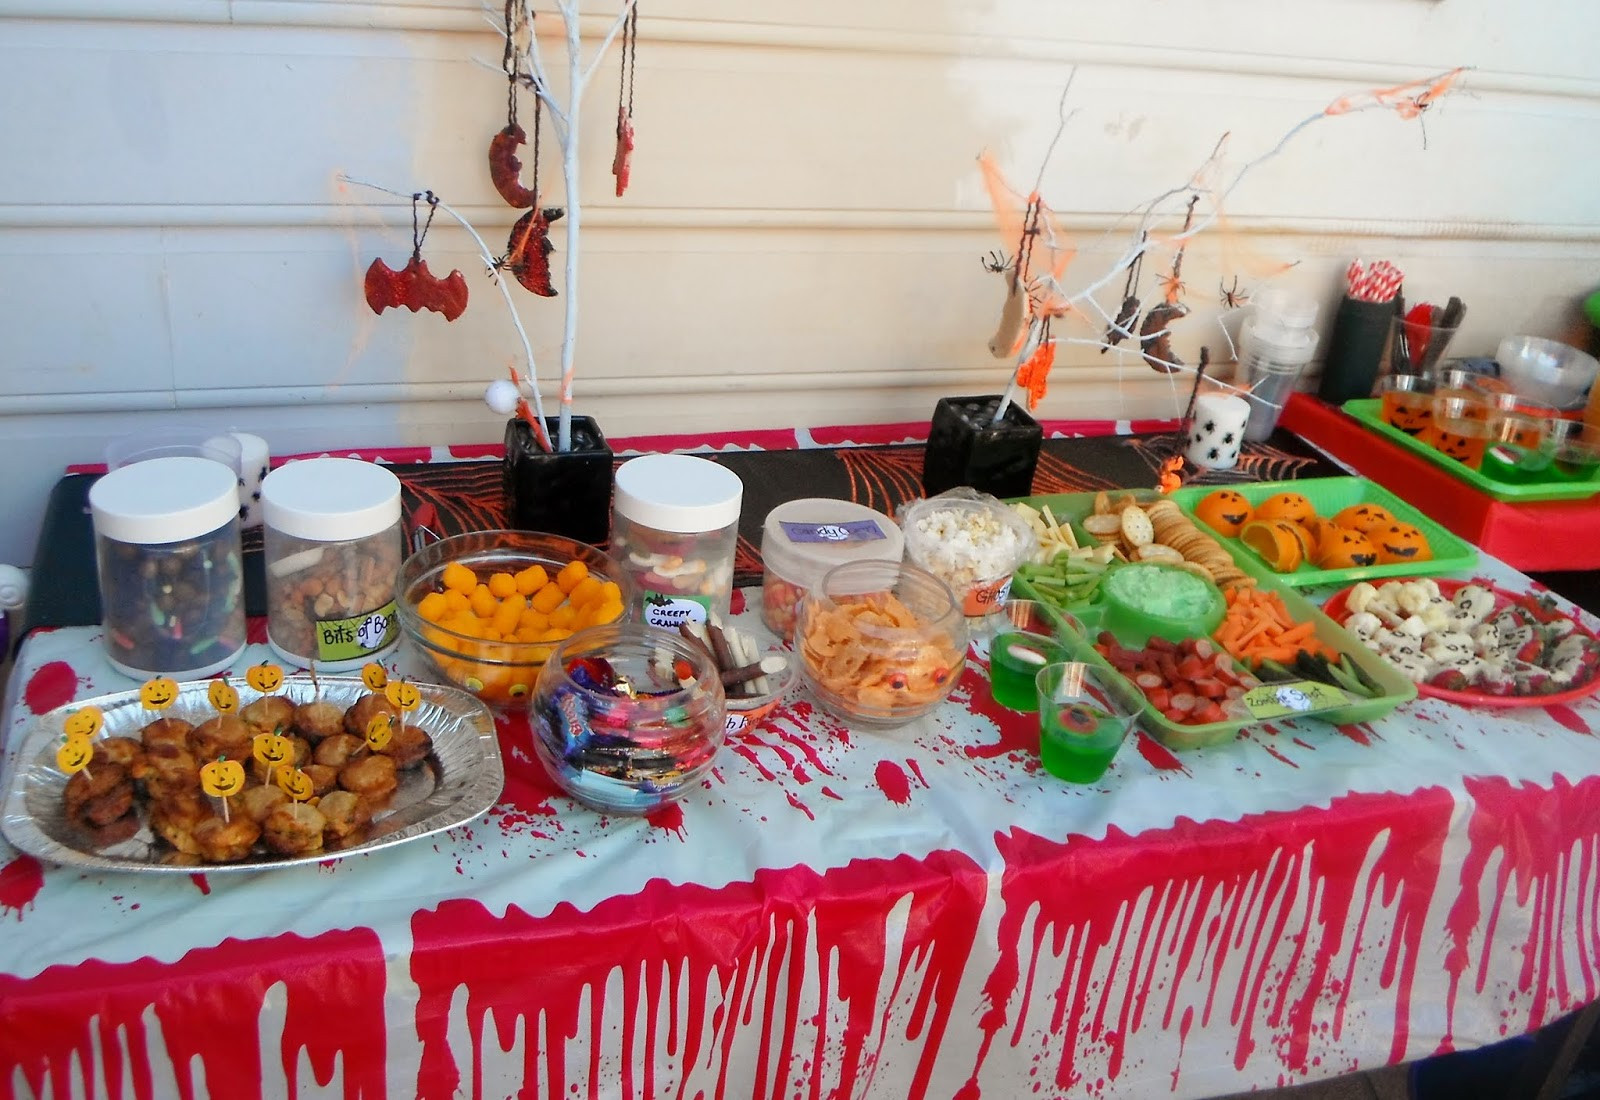 Halloween Snack Ideas For Kids Party
 Adventures at home with Mum Halloween Party Food